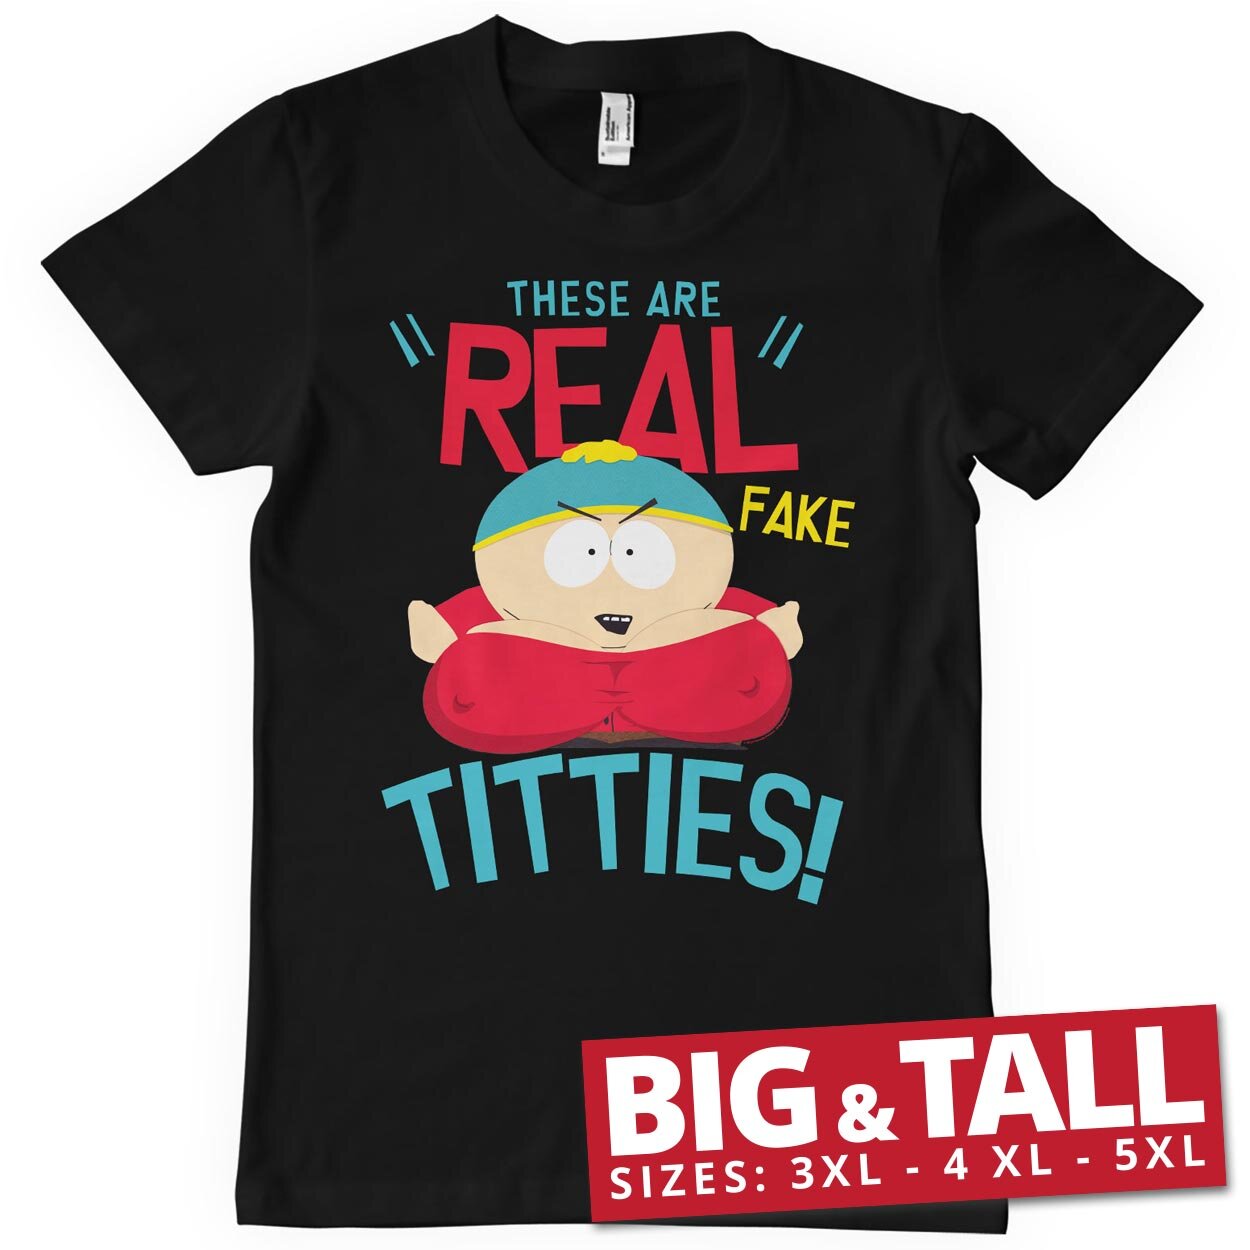 These Are Real Fake Titties Big & Tall T-Shirt